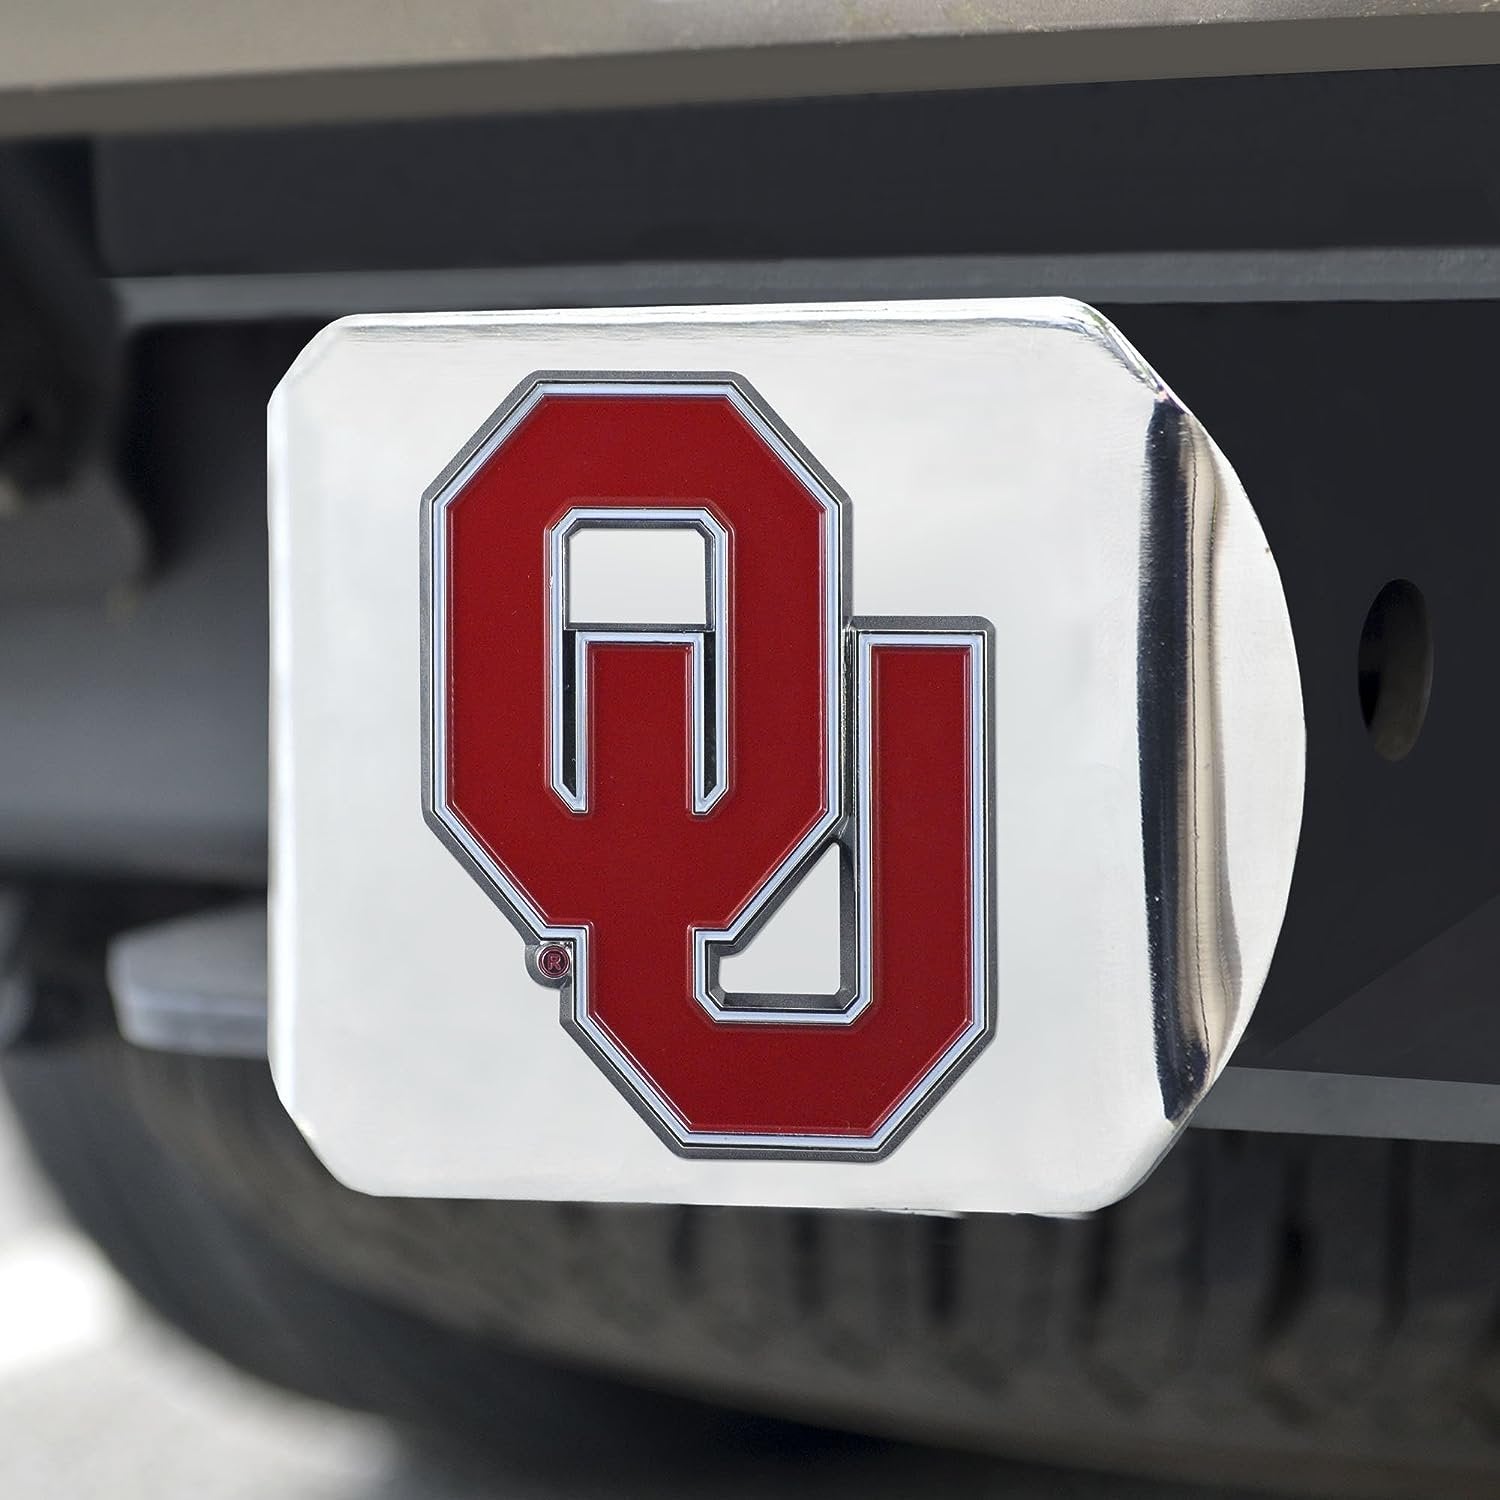 University of Oklahoma Sooners Hitch Cover Solid Metal Color Emblem 2 Inch Square Type III